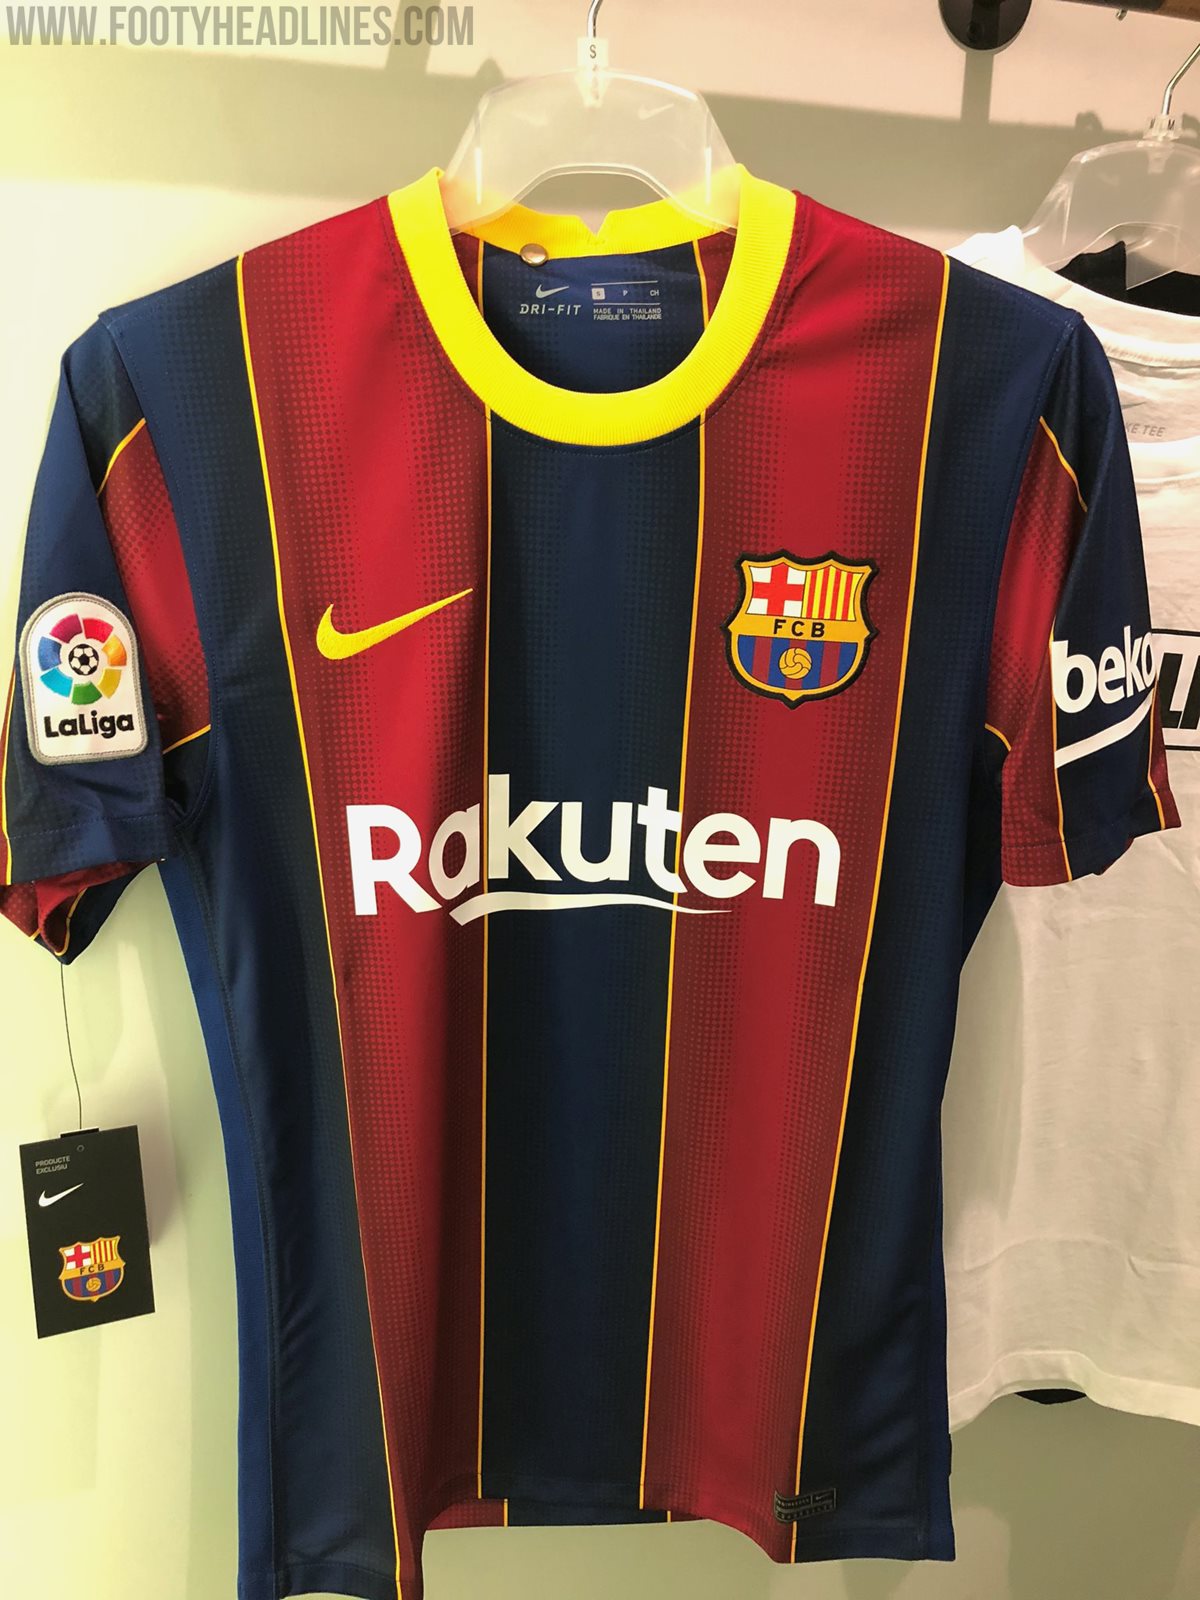 Faulty Replica Spotted For Sale? Fixed Barcelona 20-21 Home Kit Replica